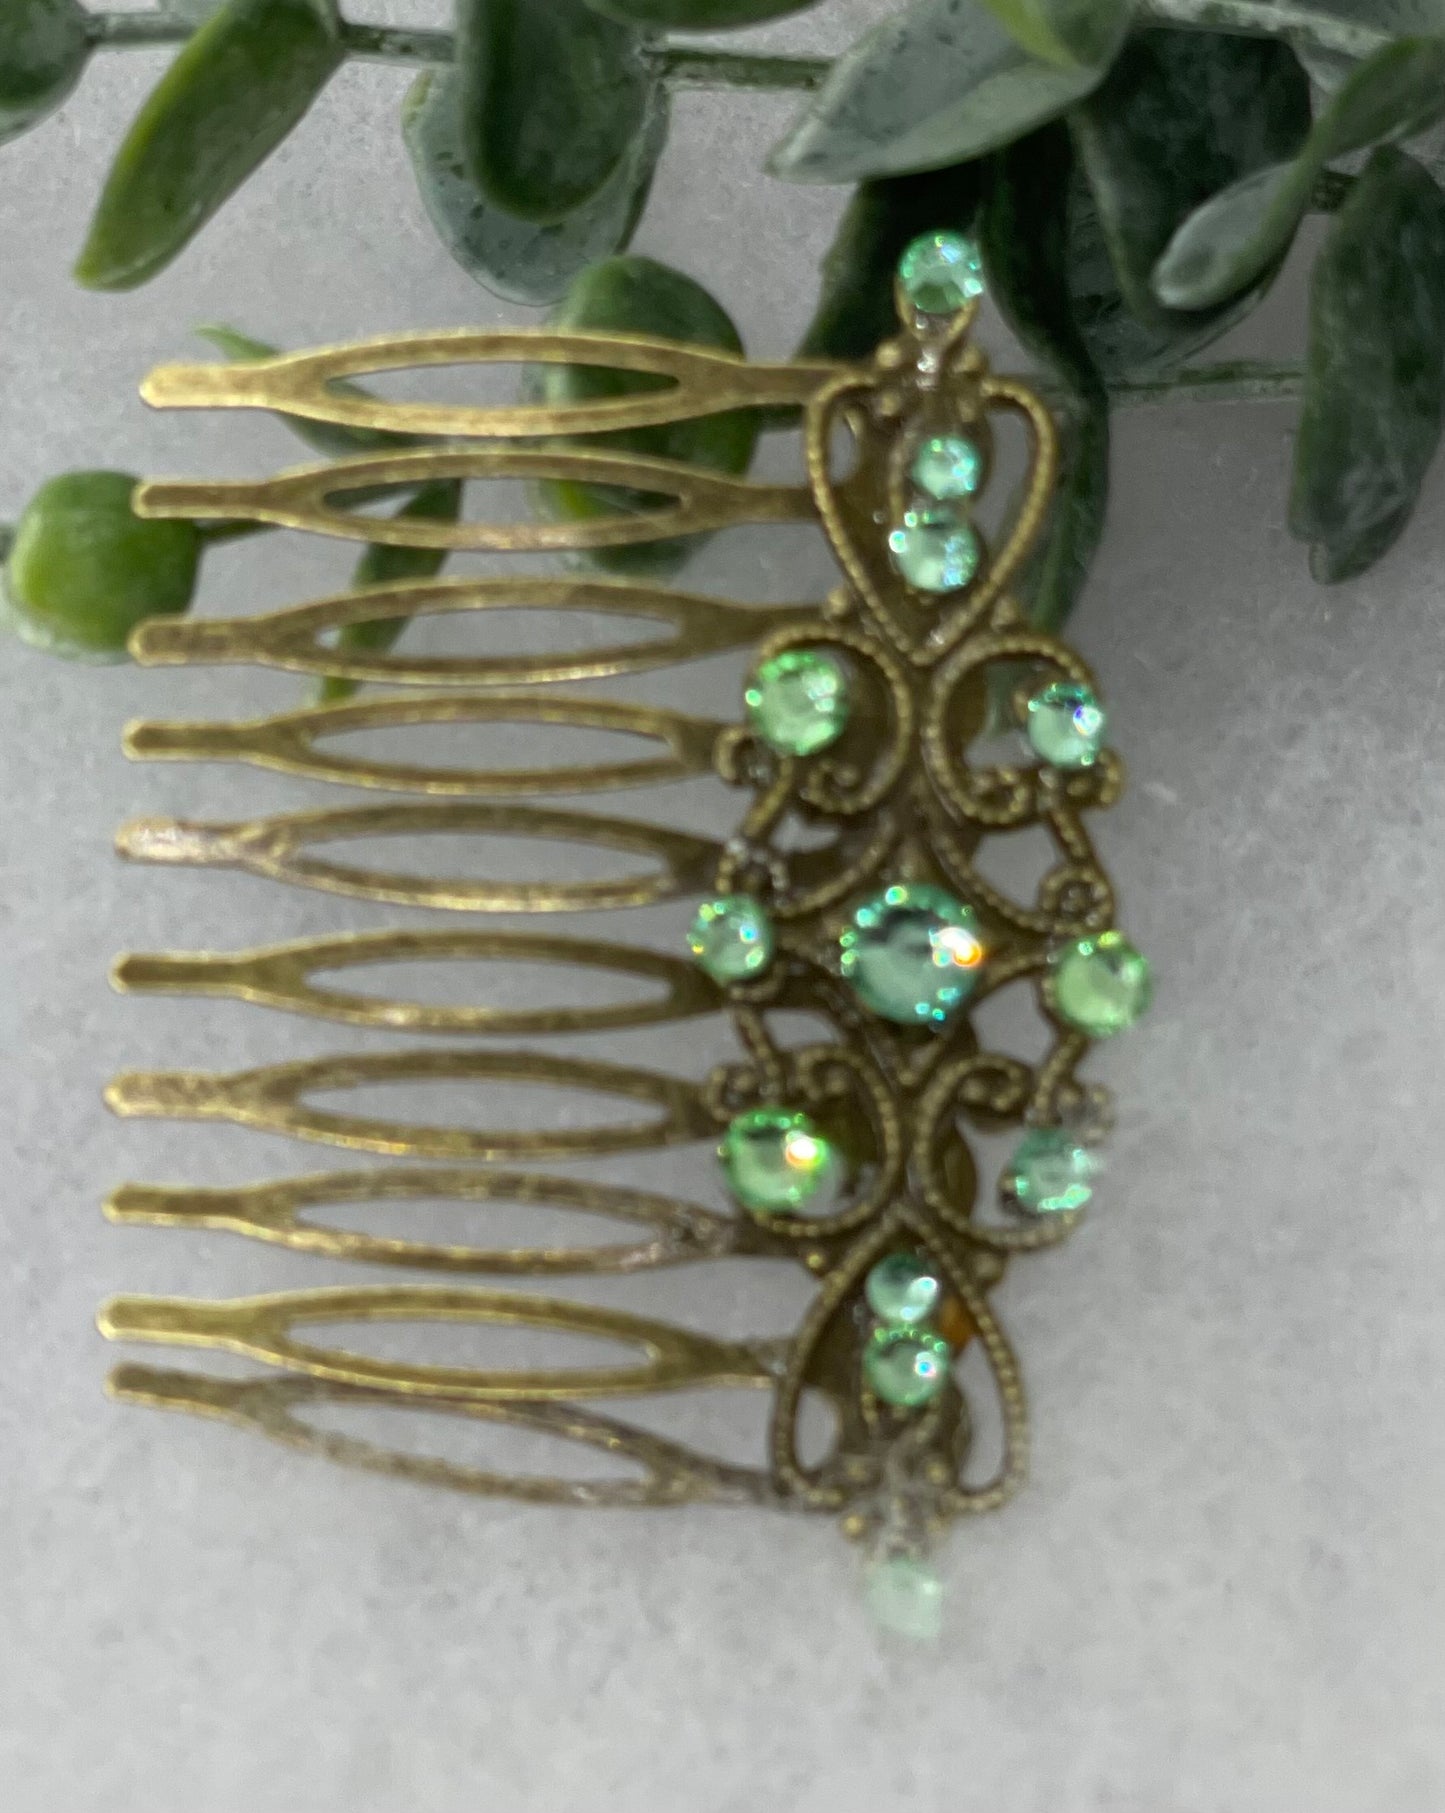 Green crystal rhinestone vintage style antique  tone side comb hair accessory accessories gift birthday event formal bridesmaid  2.5” Metal side Comb